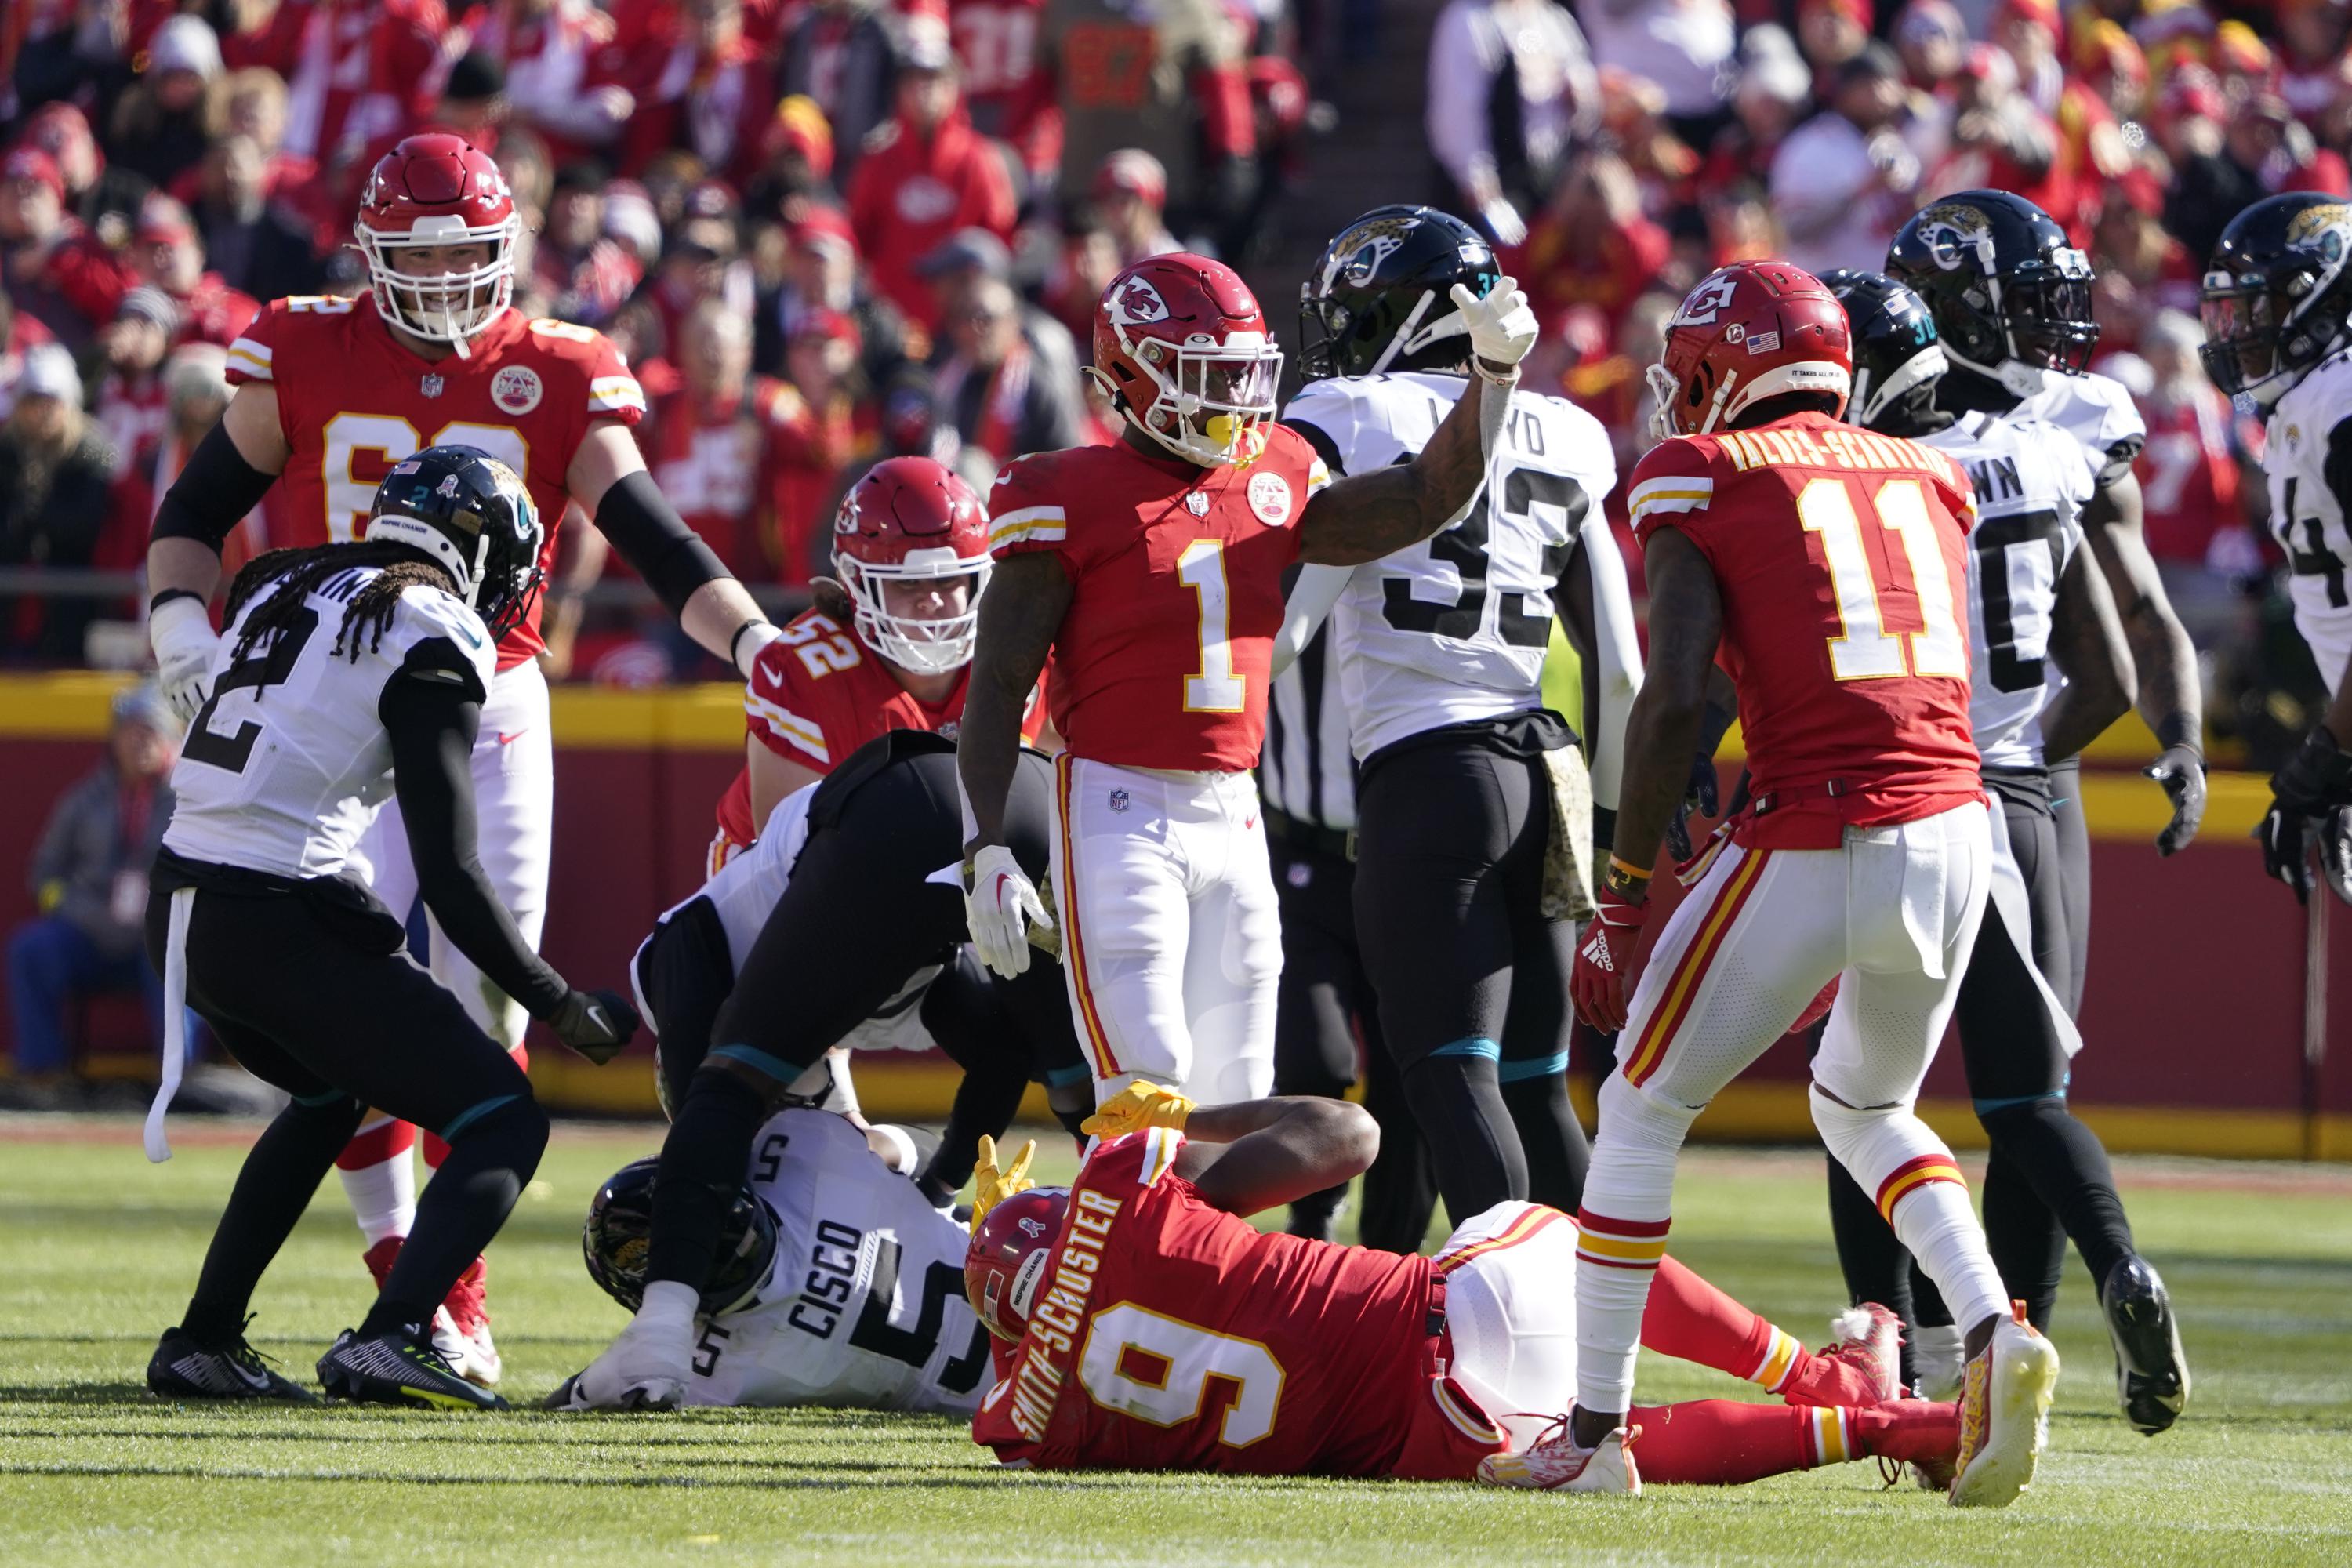 Chiefs missing top 3 wide receivers to injuries, illnesses AP News